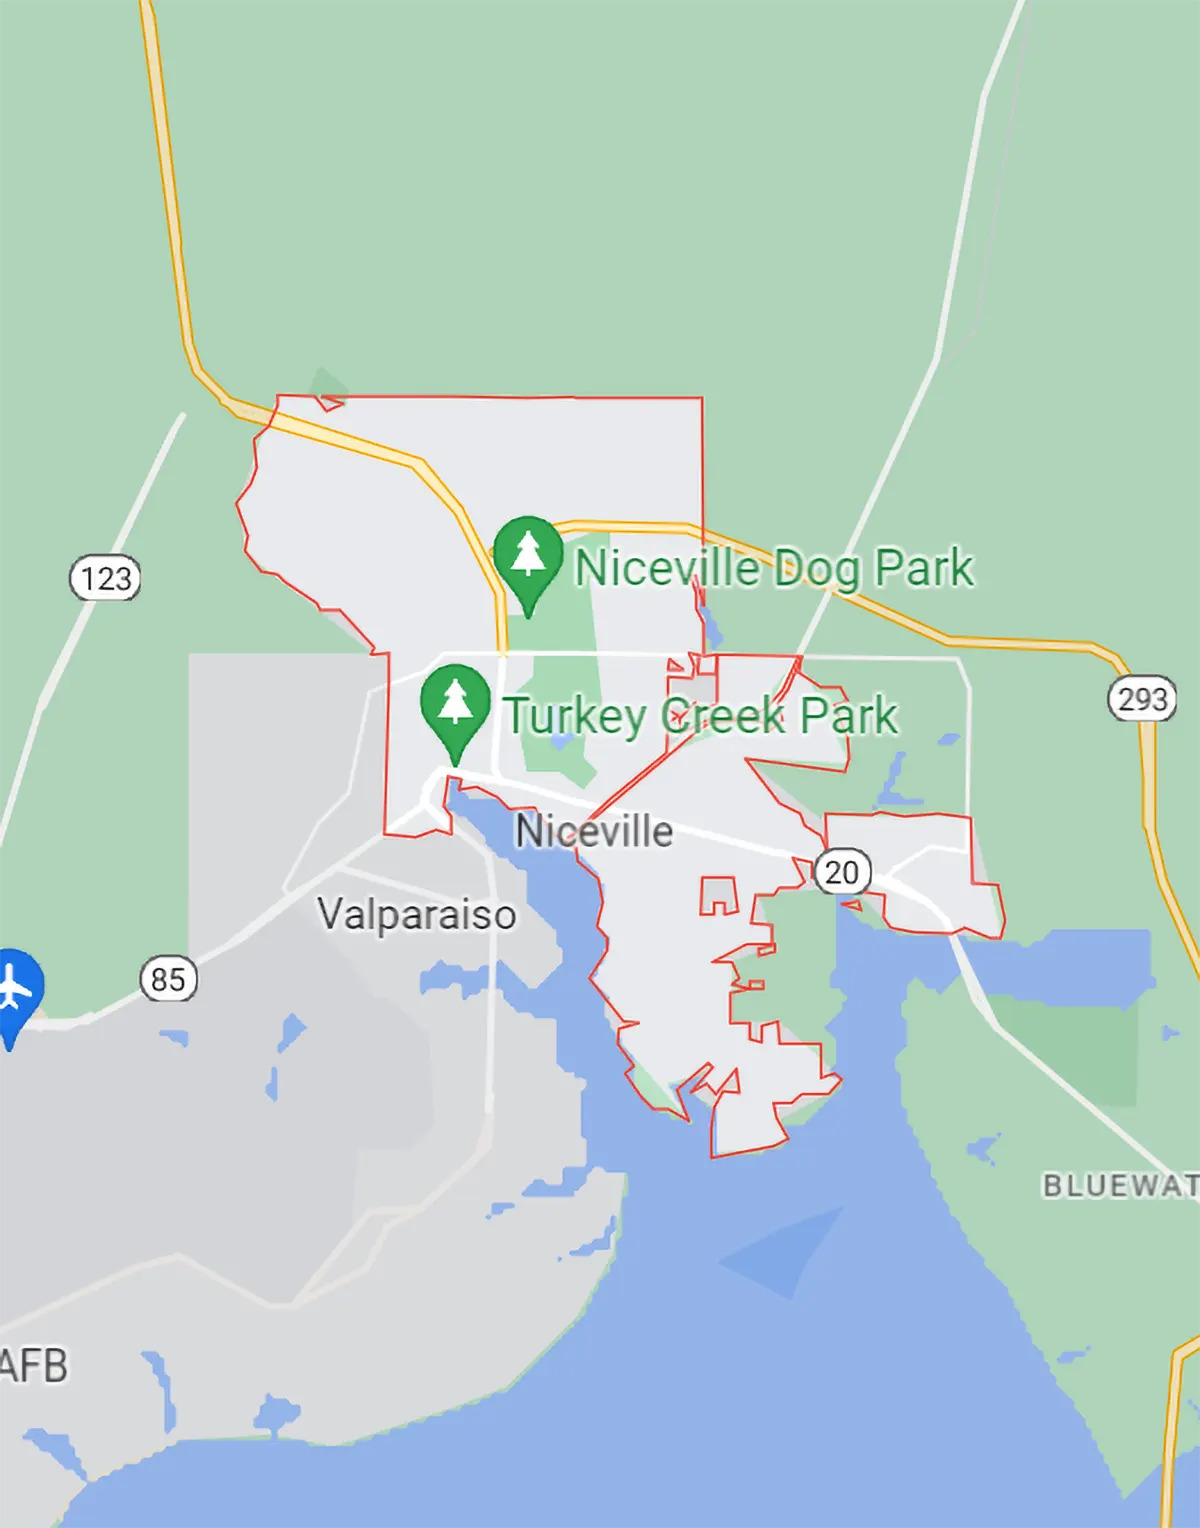 City District on Map City Skyview | Air Conditioning Repair in Niceville | Emerald Coast Air Conditioning and Heating | AirConditioningRepairPensacola.com